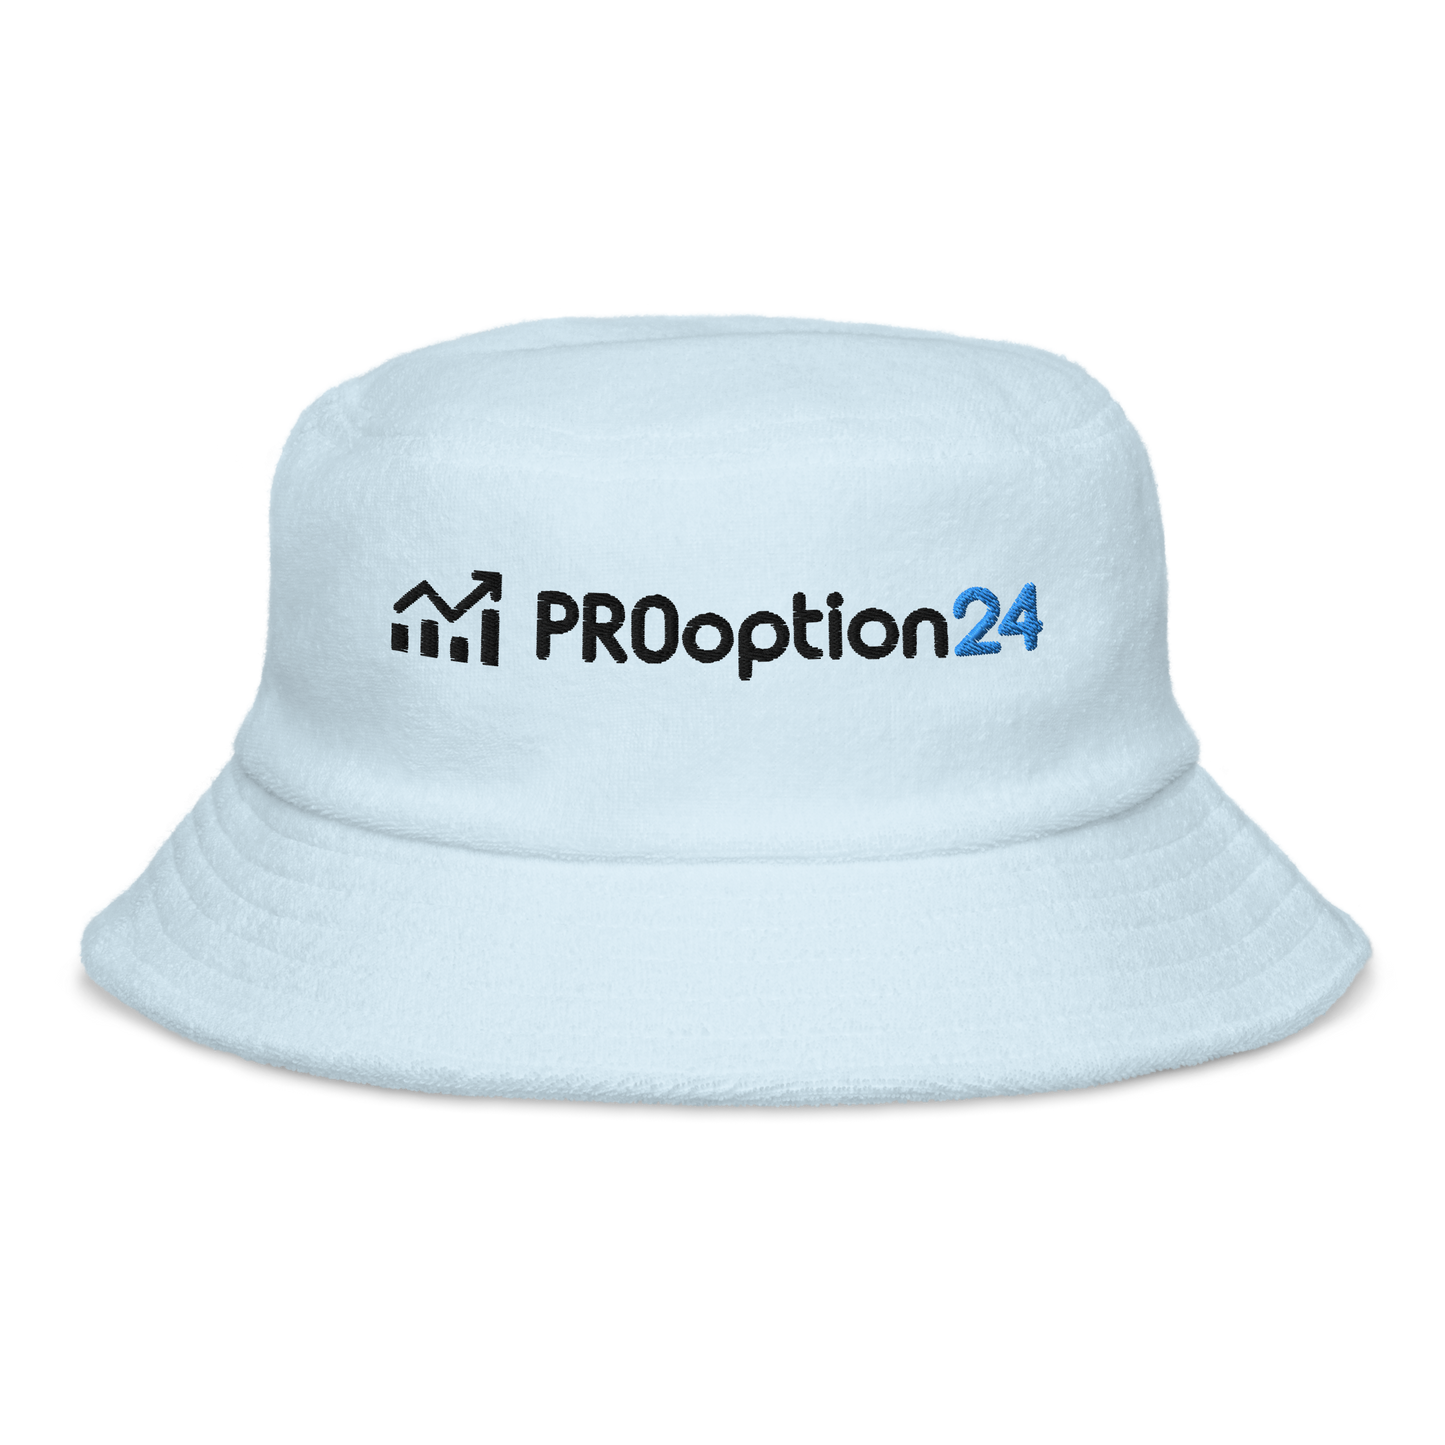 Prooption24 Unstructured terry cloth bucket hat